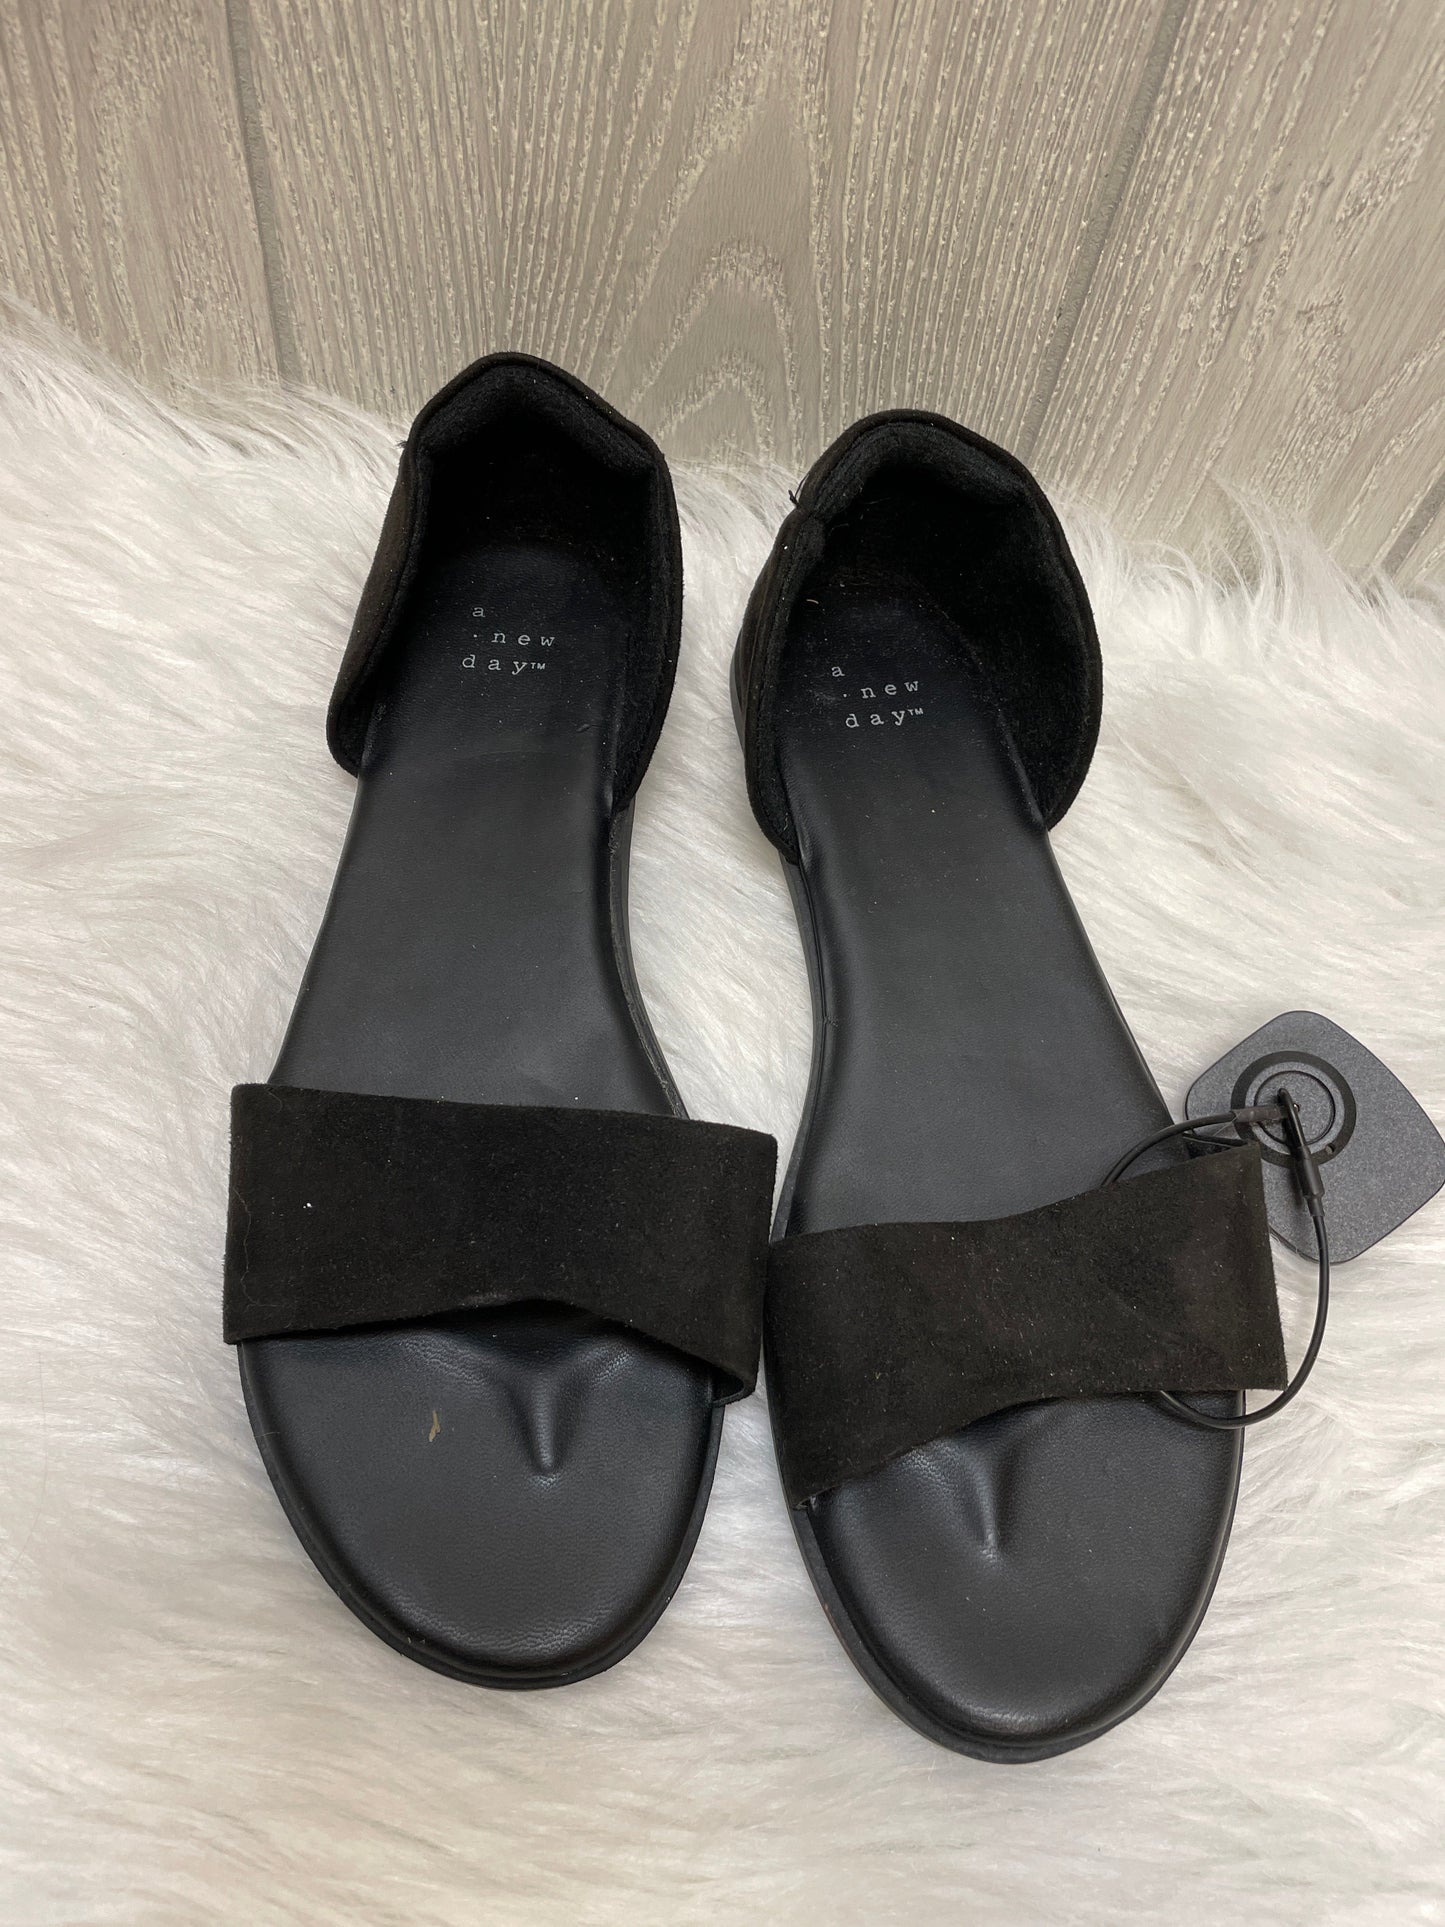 Black Sandals Flats A New Day, Size 7